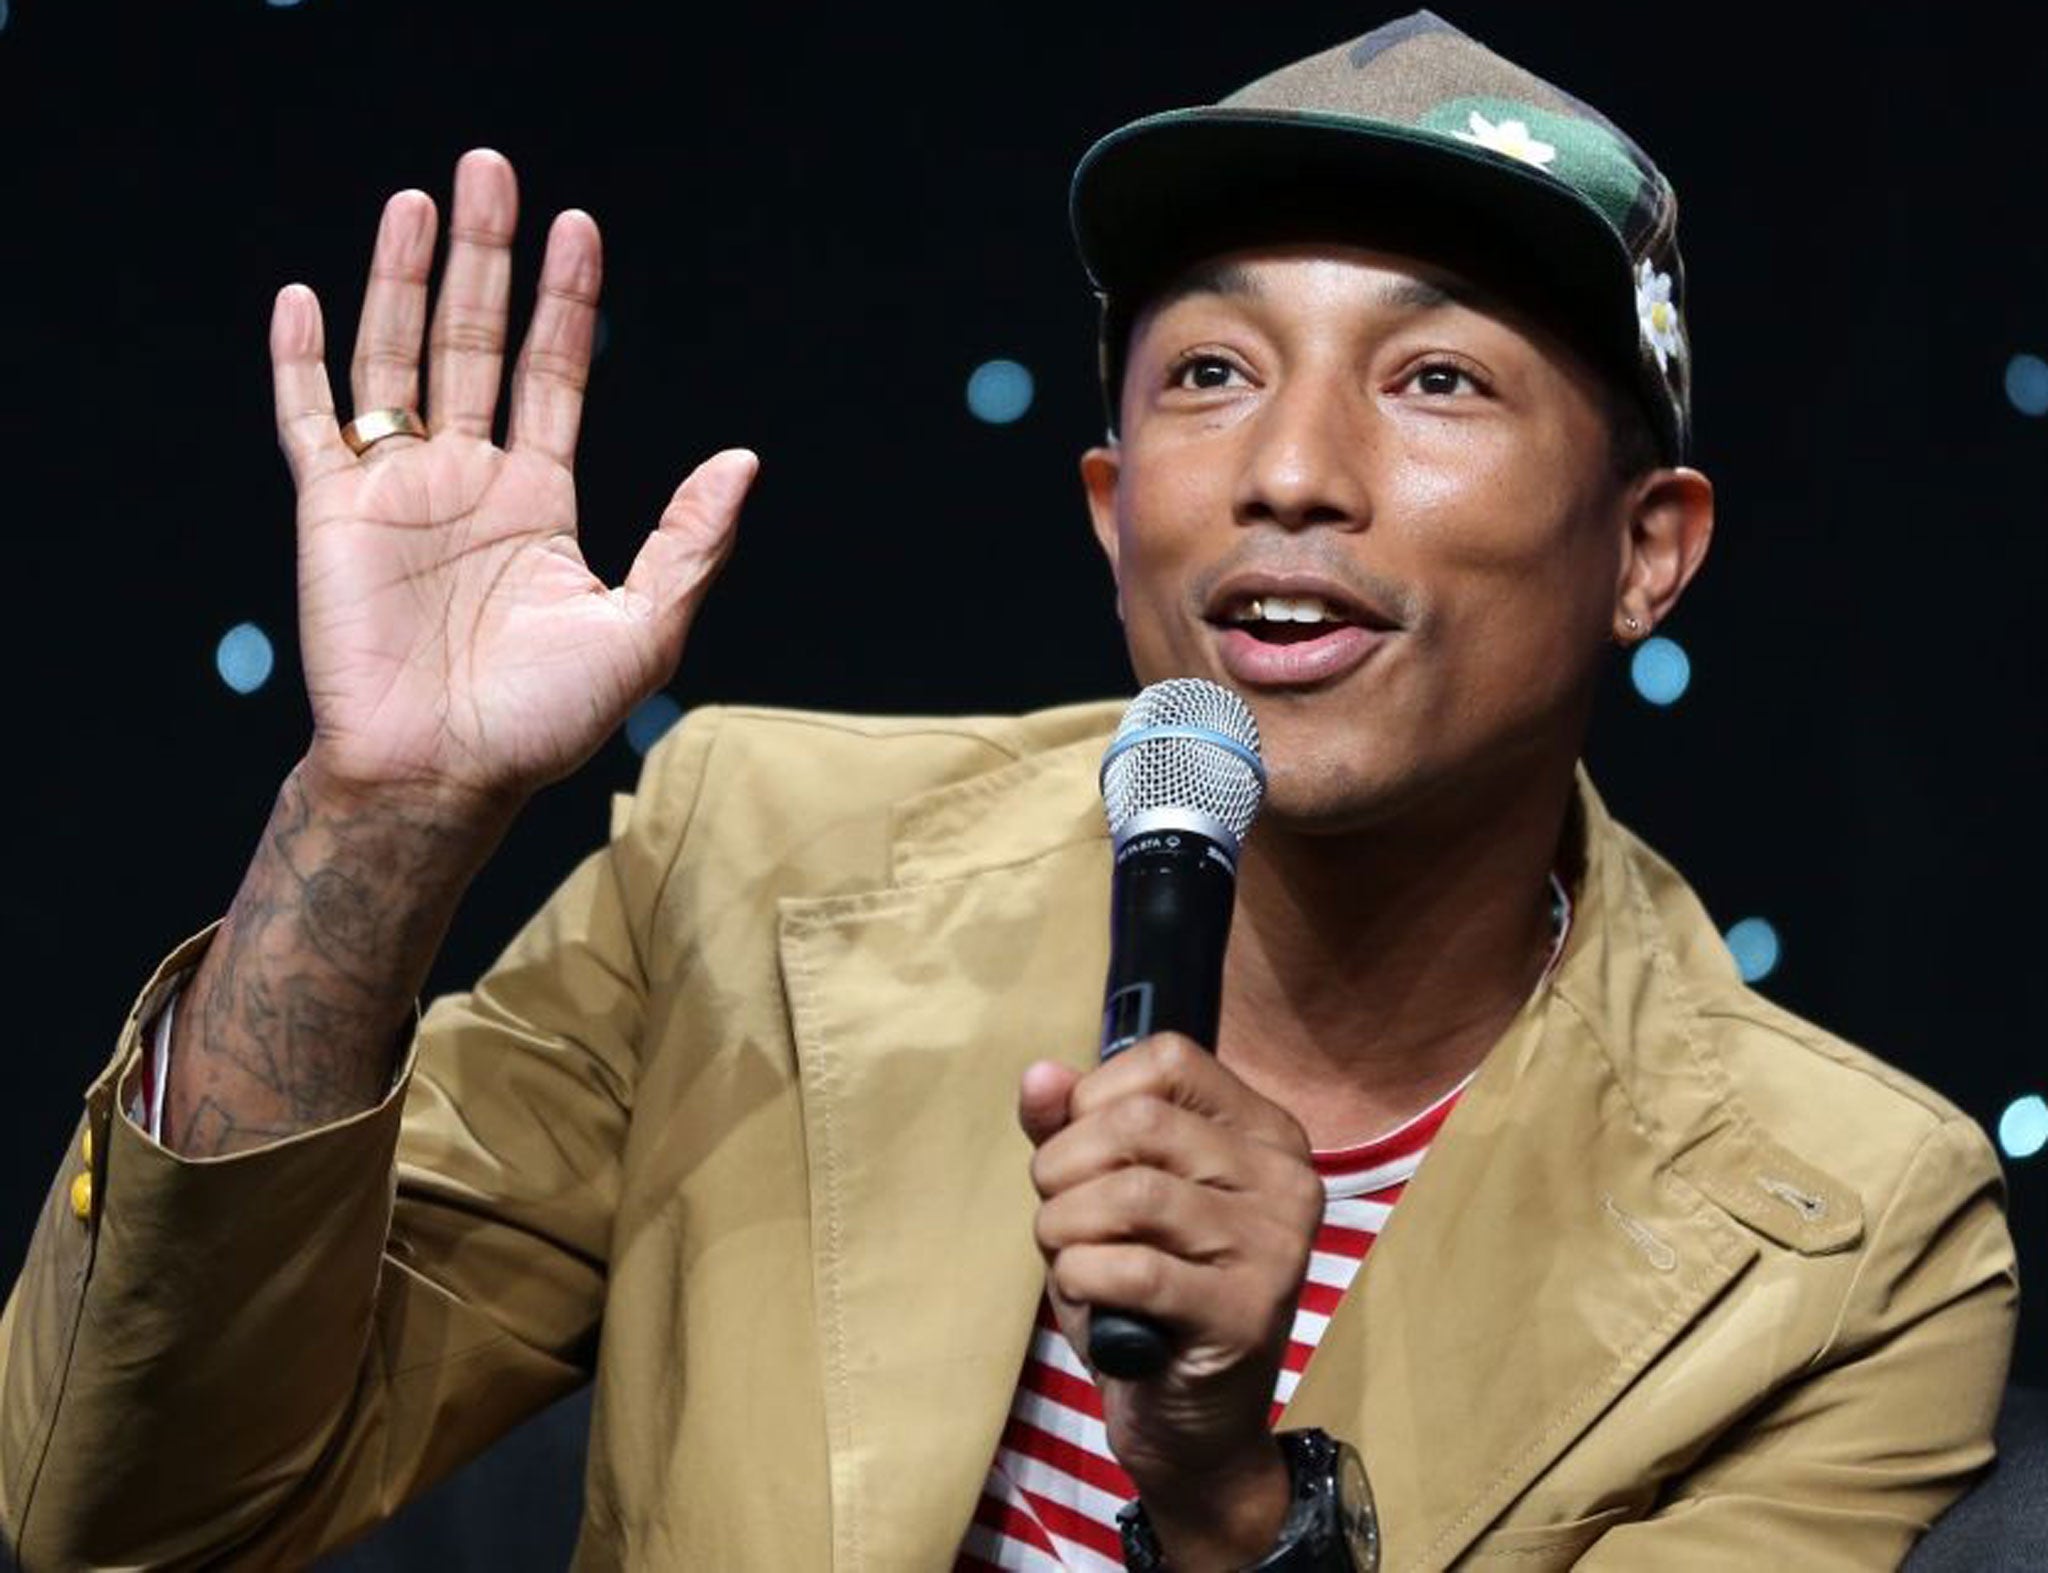 Pharrell Williams has already featured on the two big hits of the summer